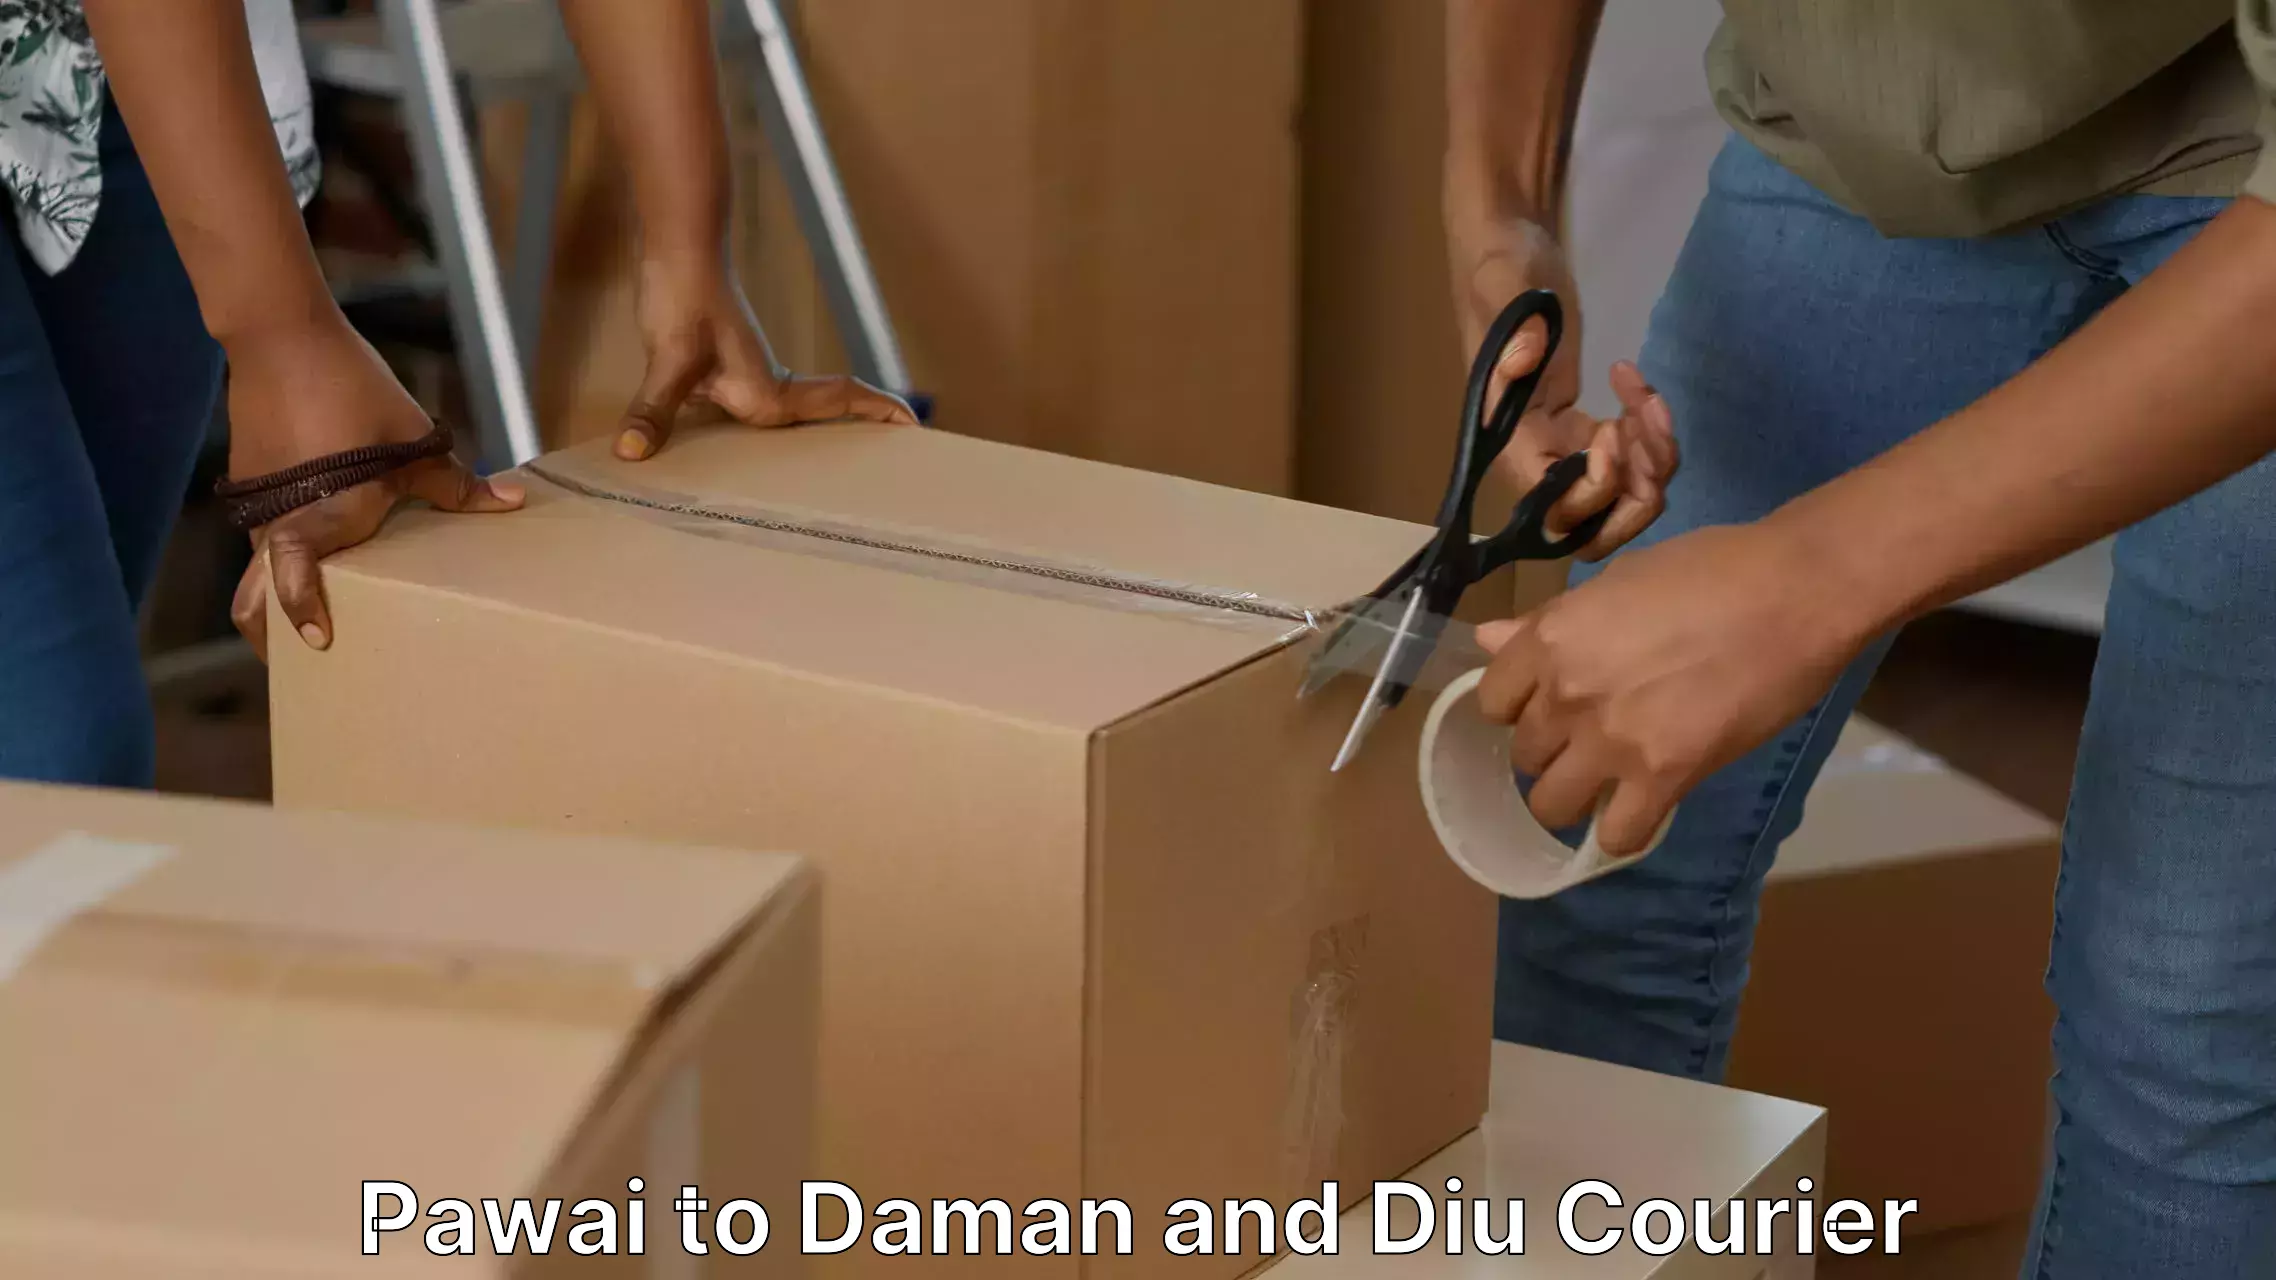 Furniture moving specialists Pawai to Daman